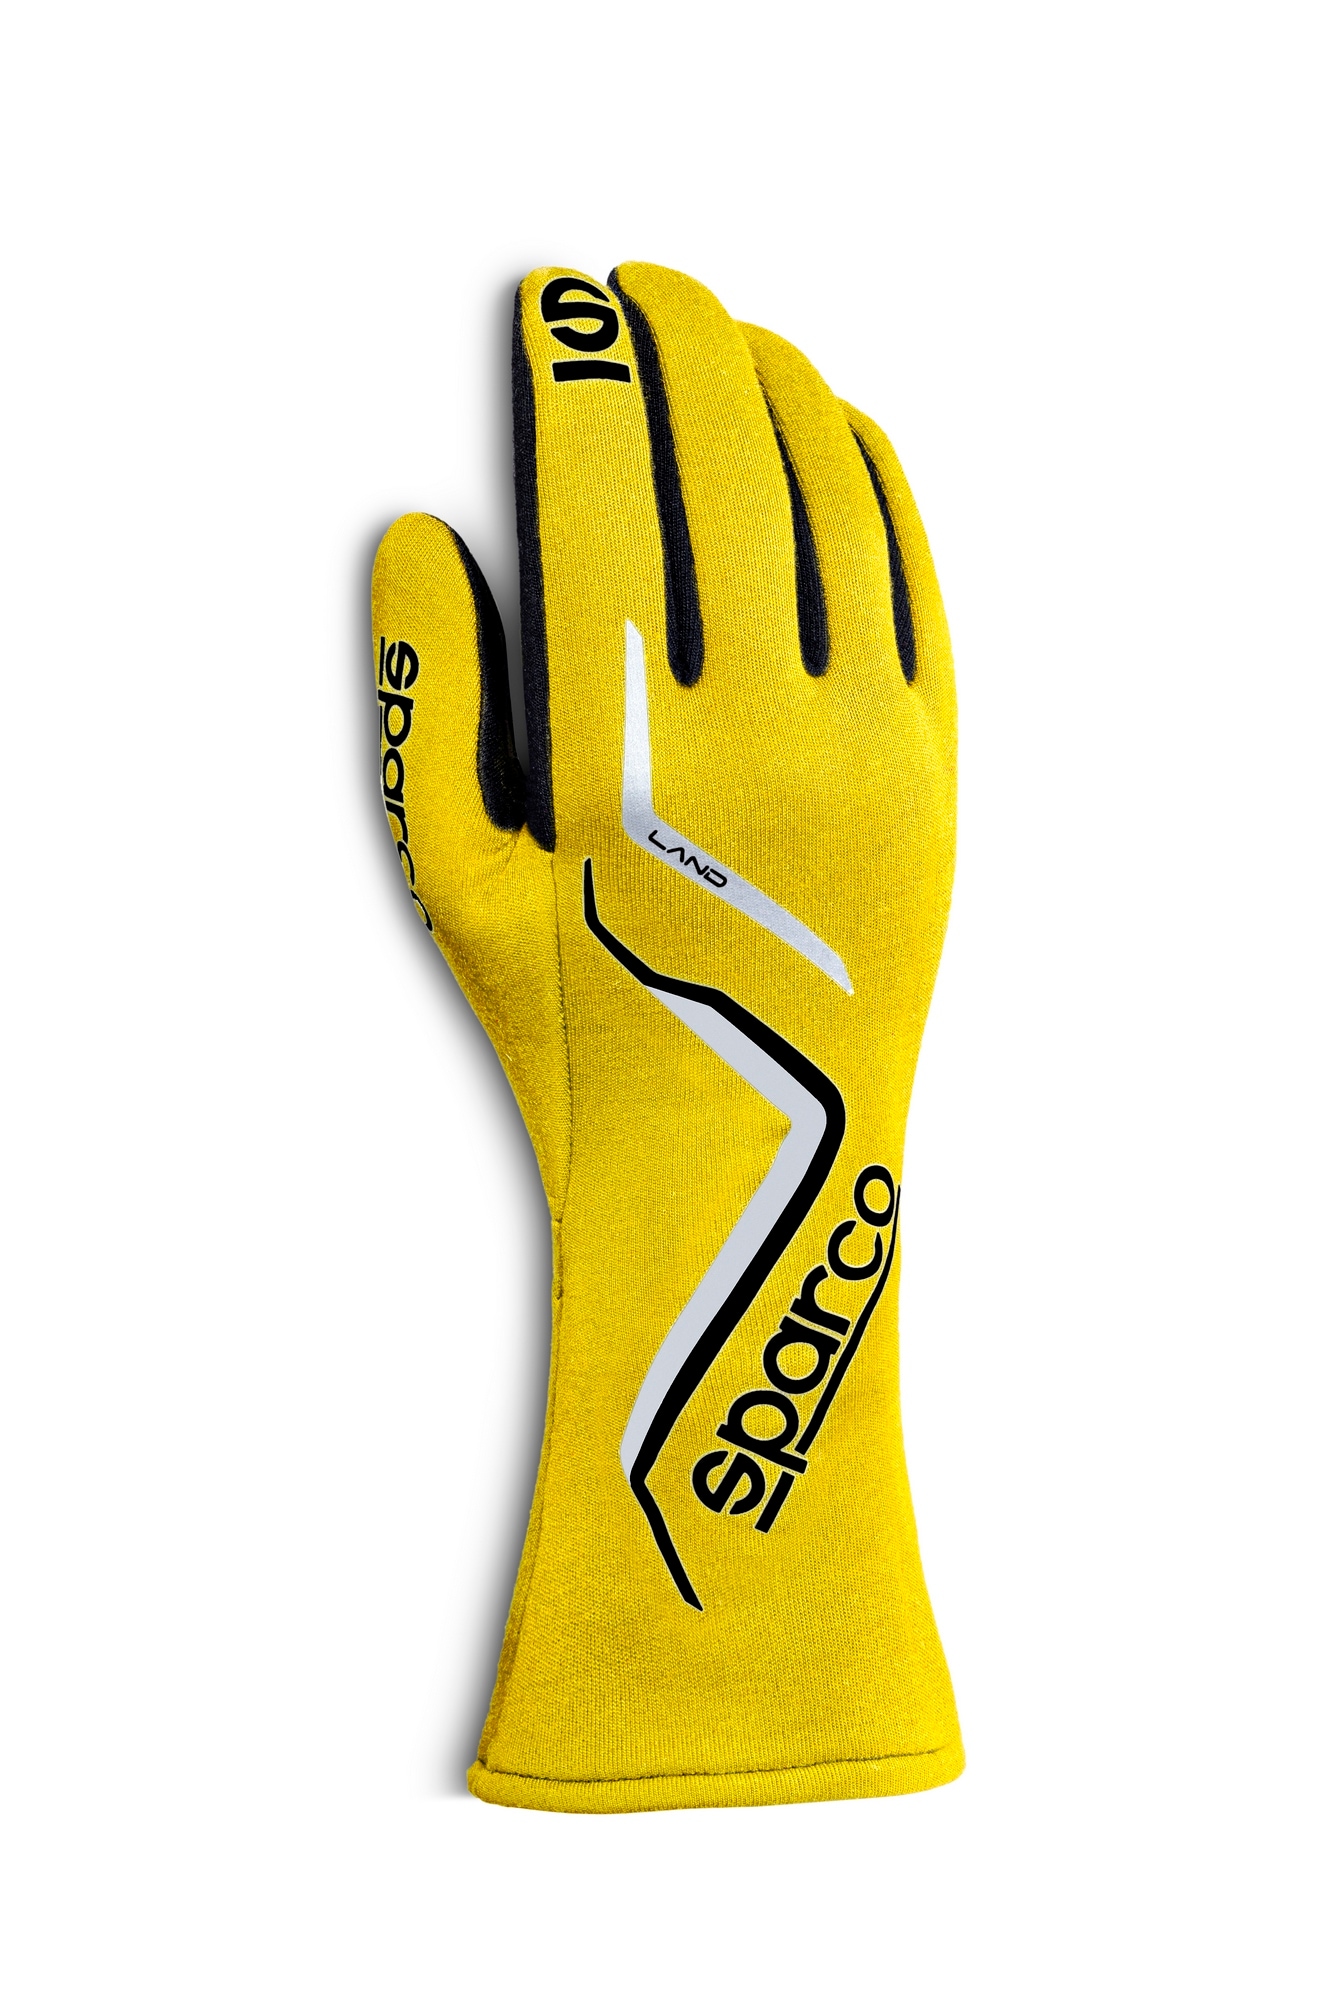 Gloves Sparco Land Yellow